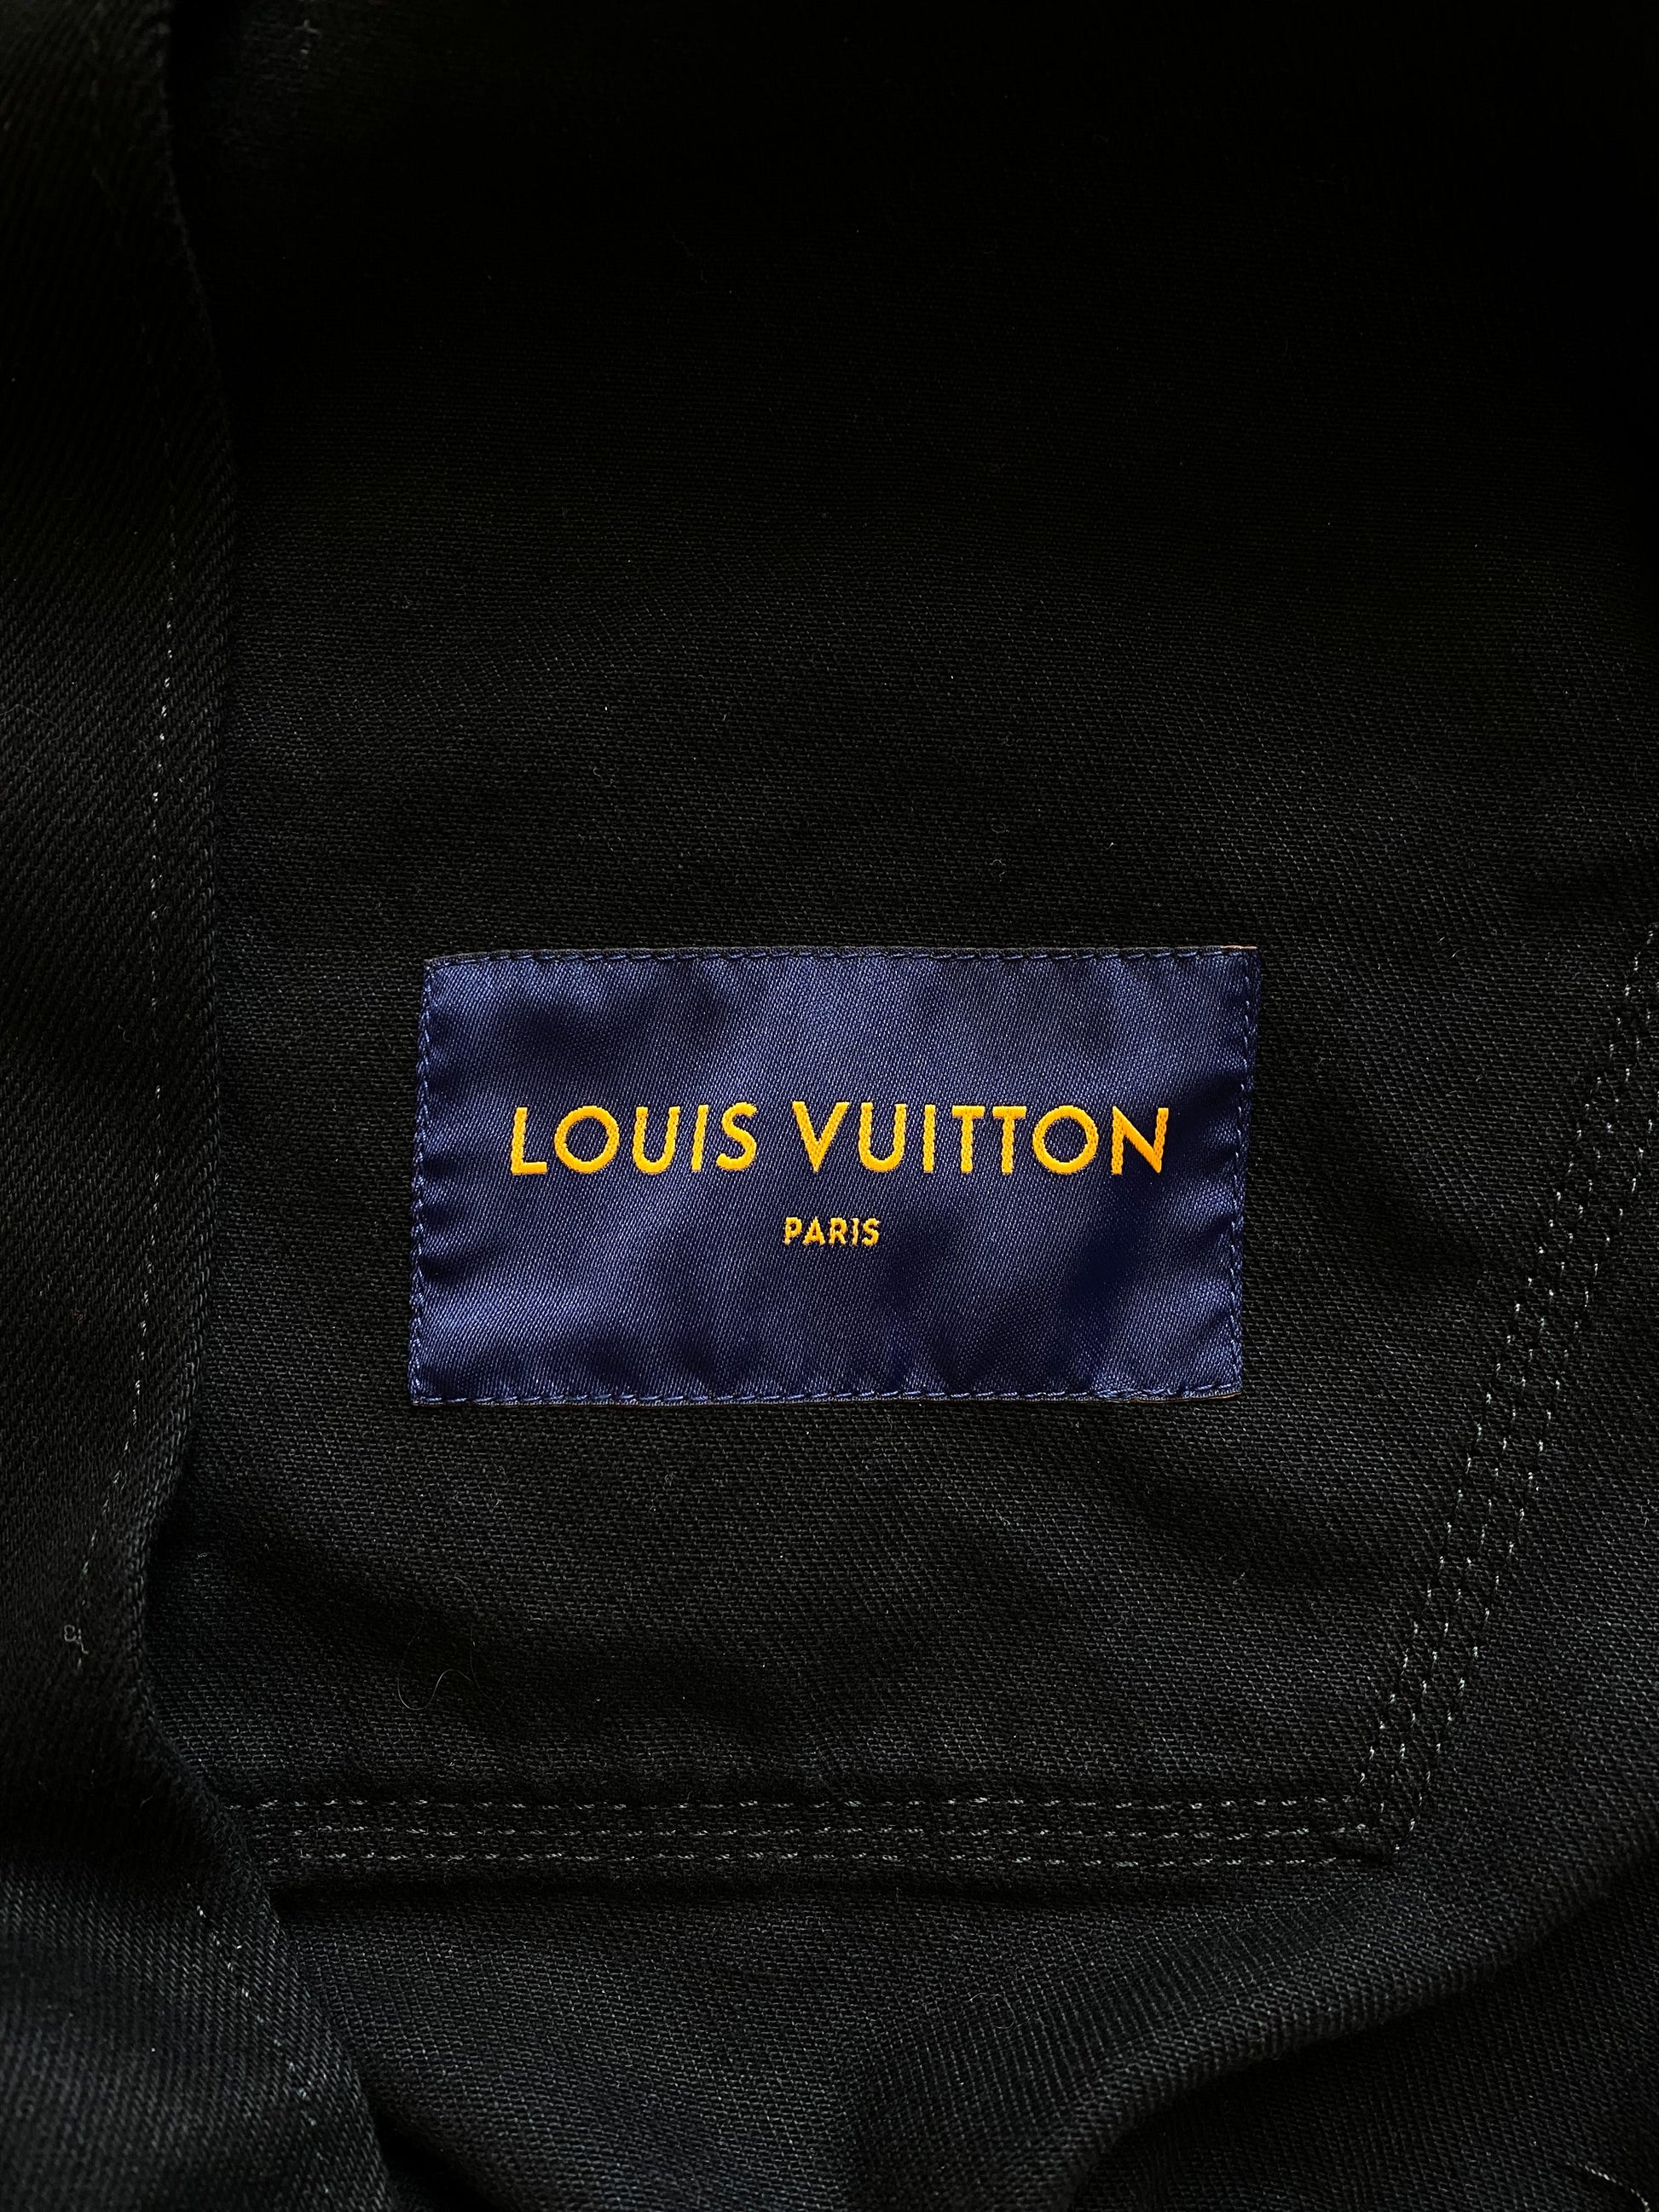 louis vuitton - clothing tags